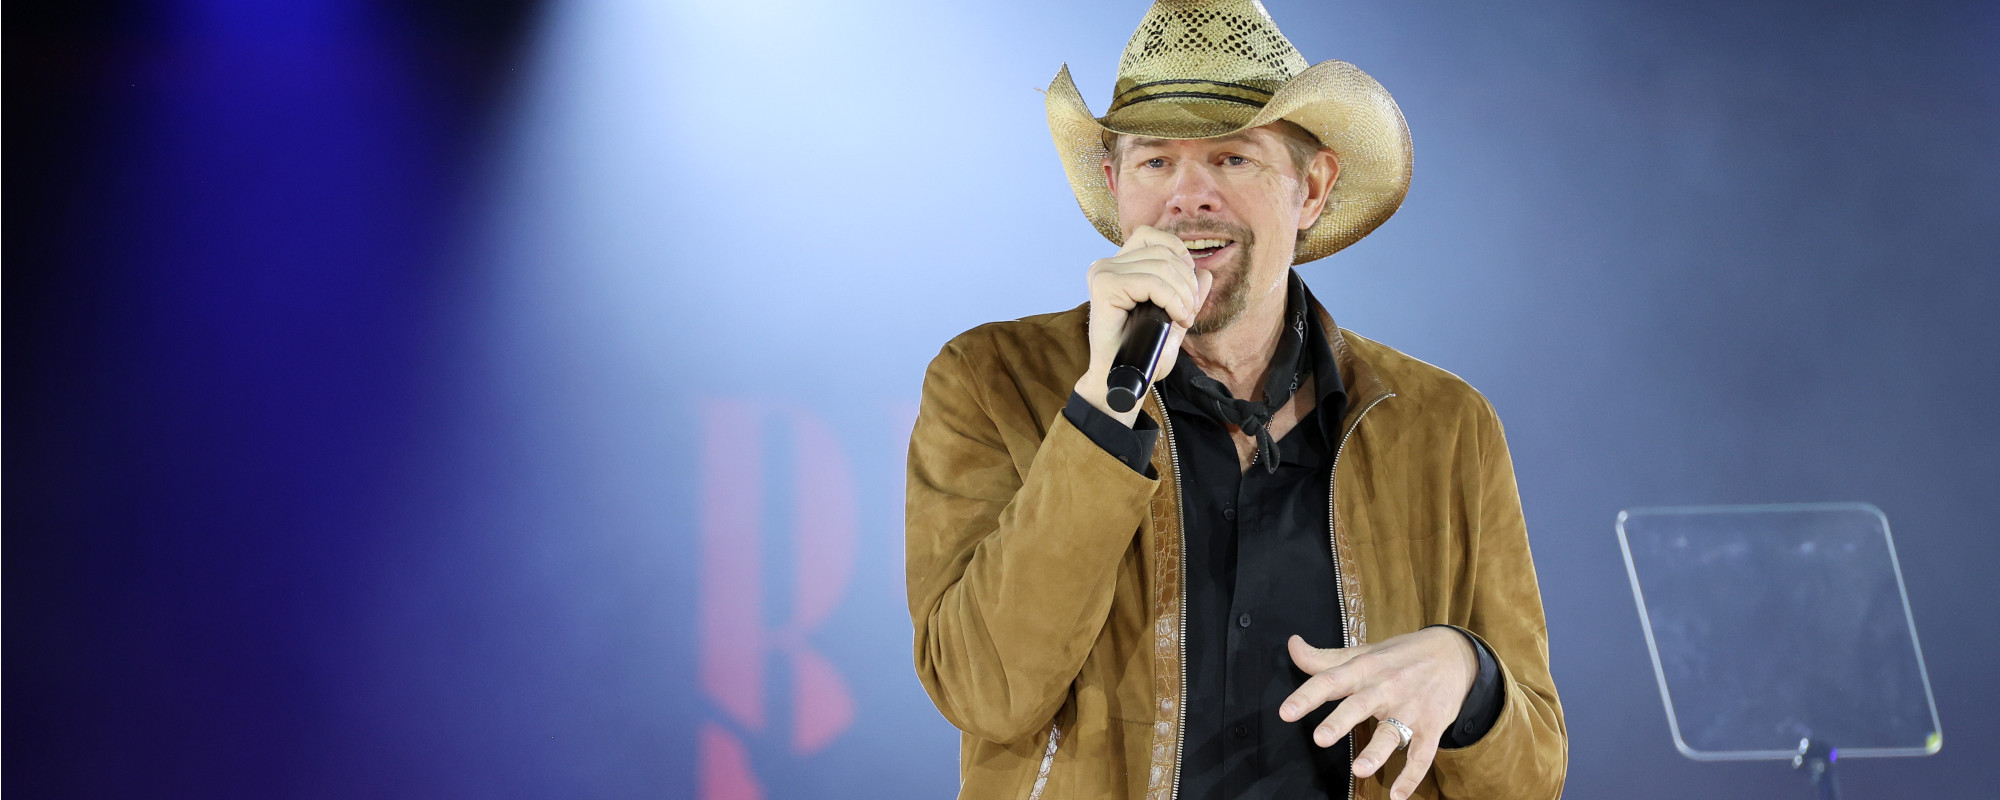 Toby Keith Gives Update on Cancer Fight: “I Don’t Know if You’re Ever Done with It”